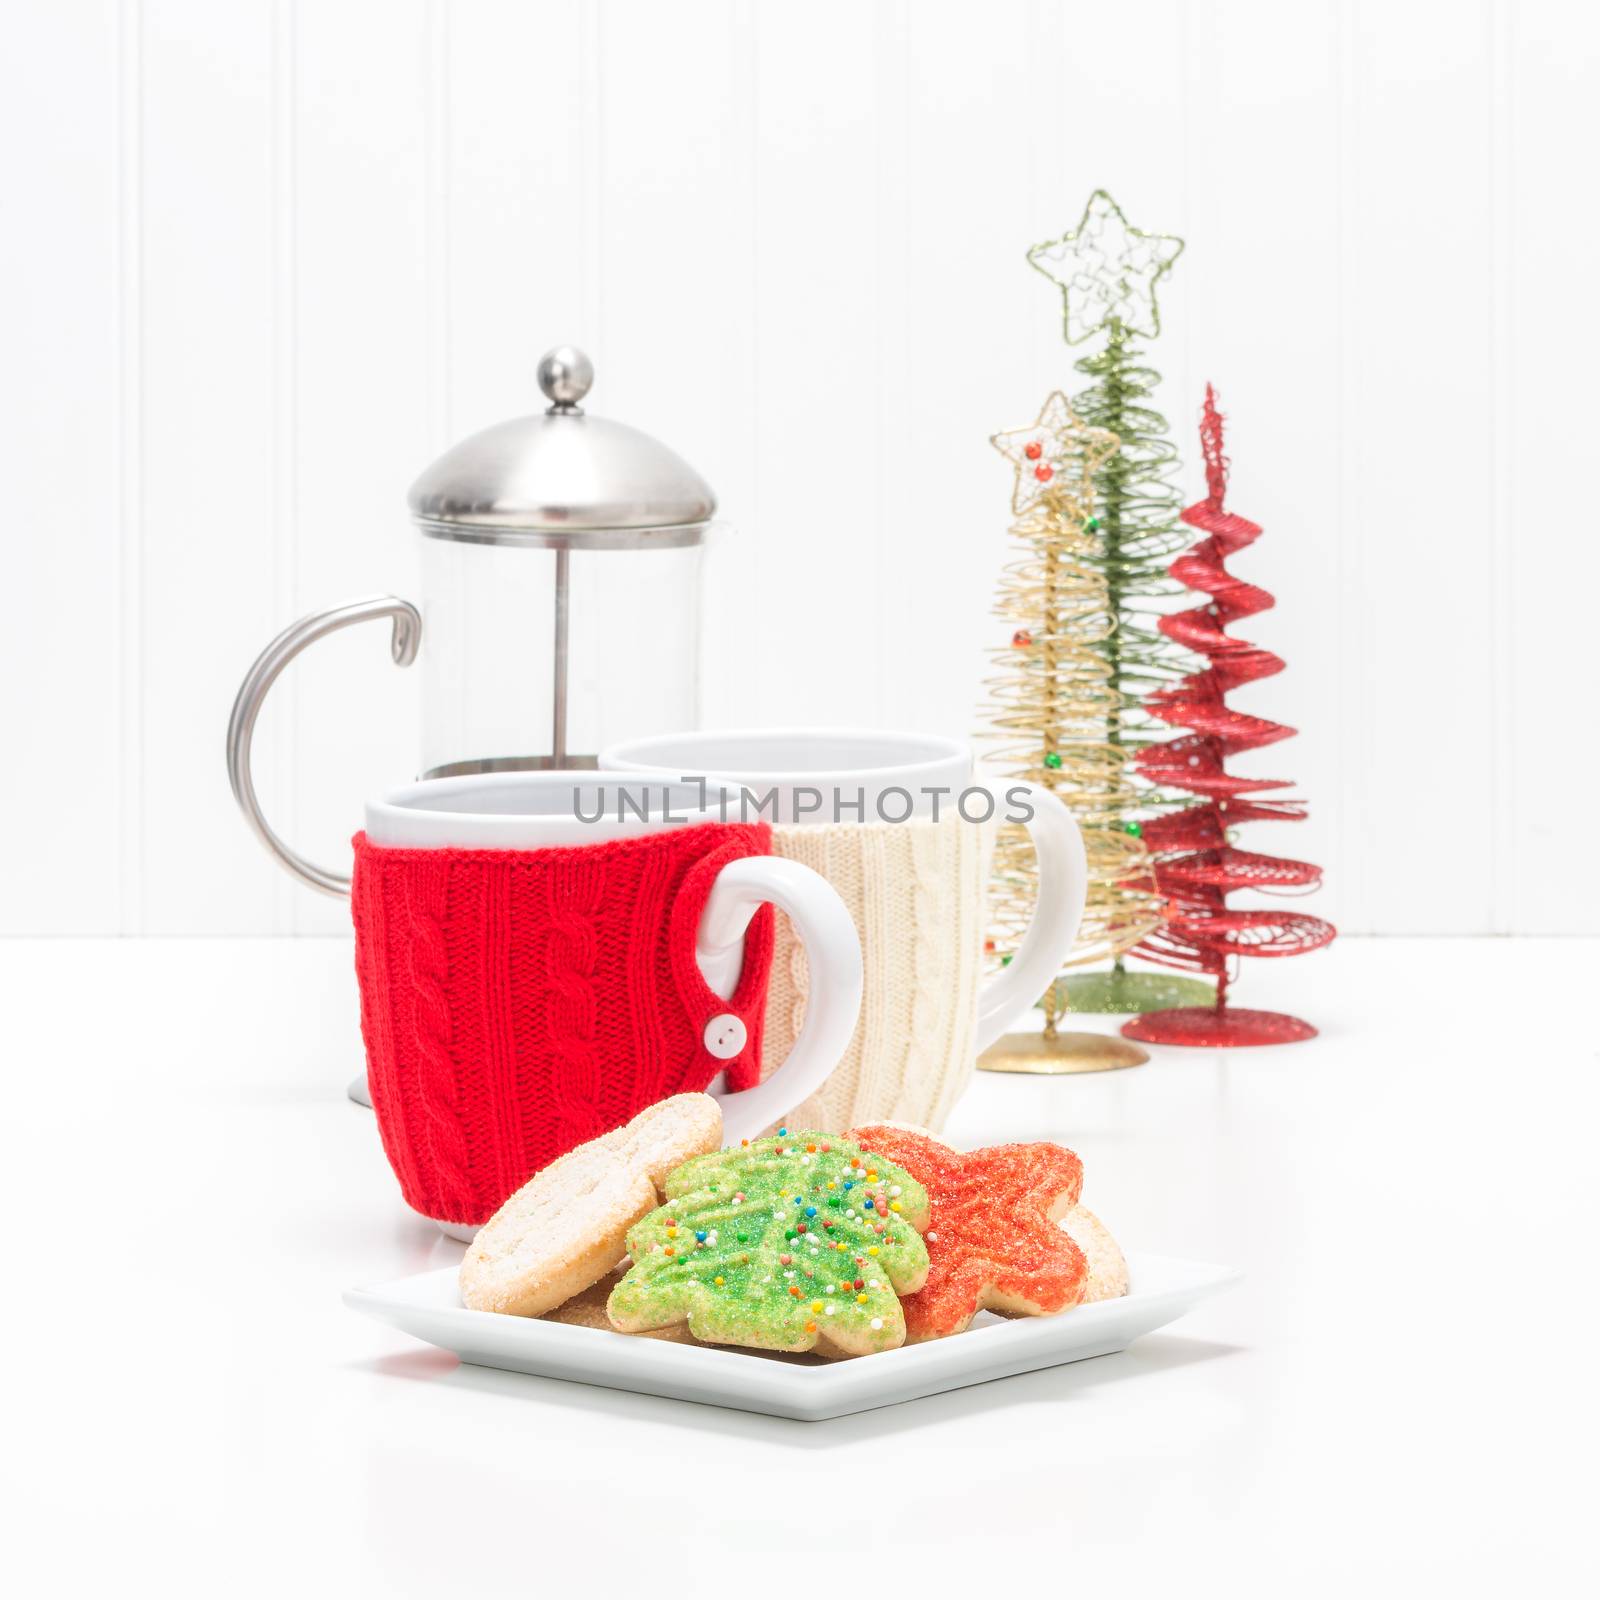 Christmas Cookies and Coffee by billberryphotography